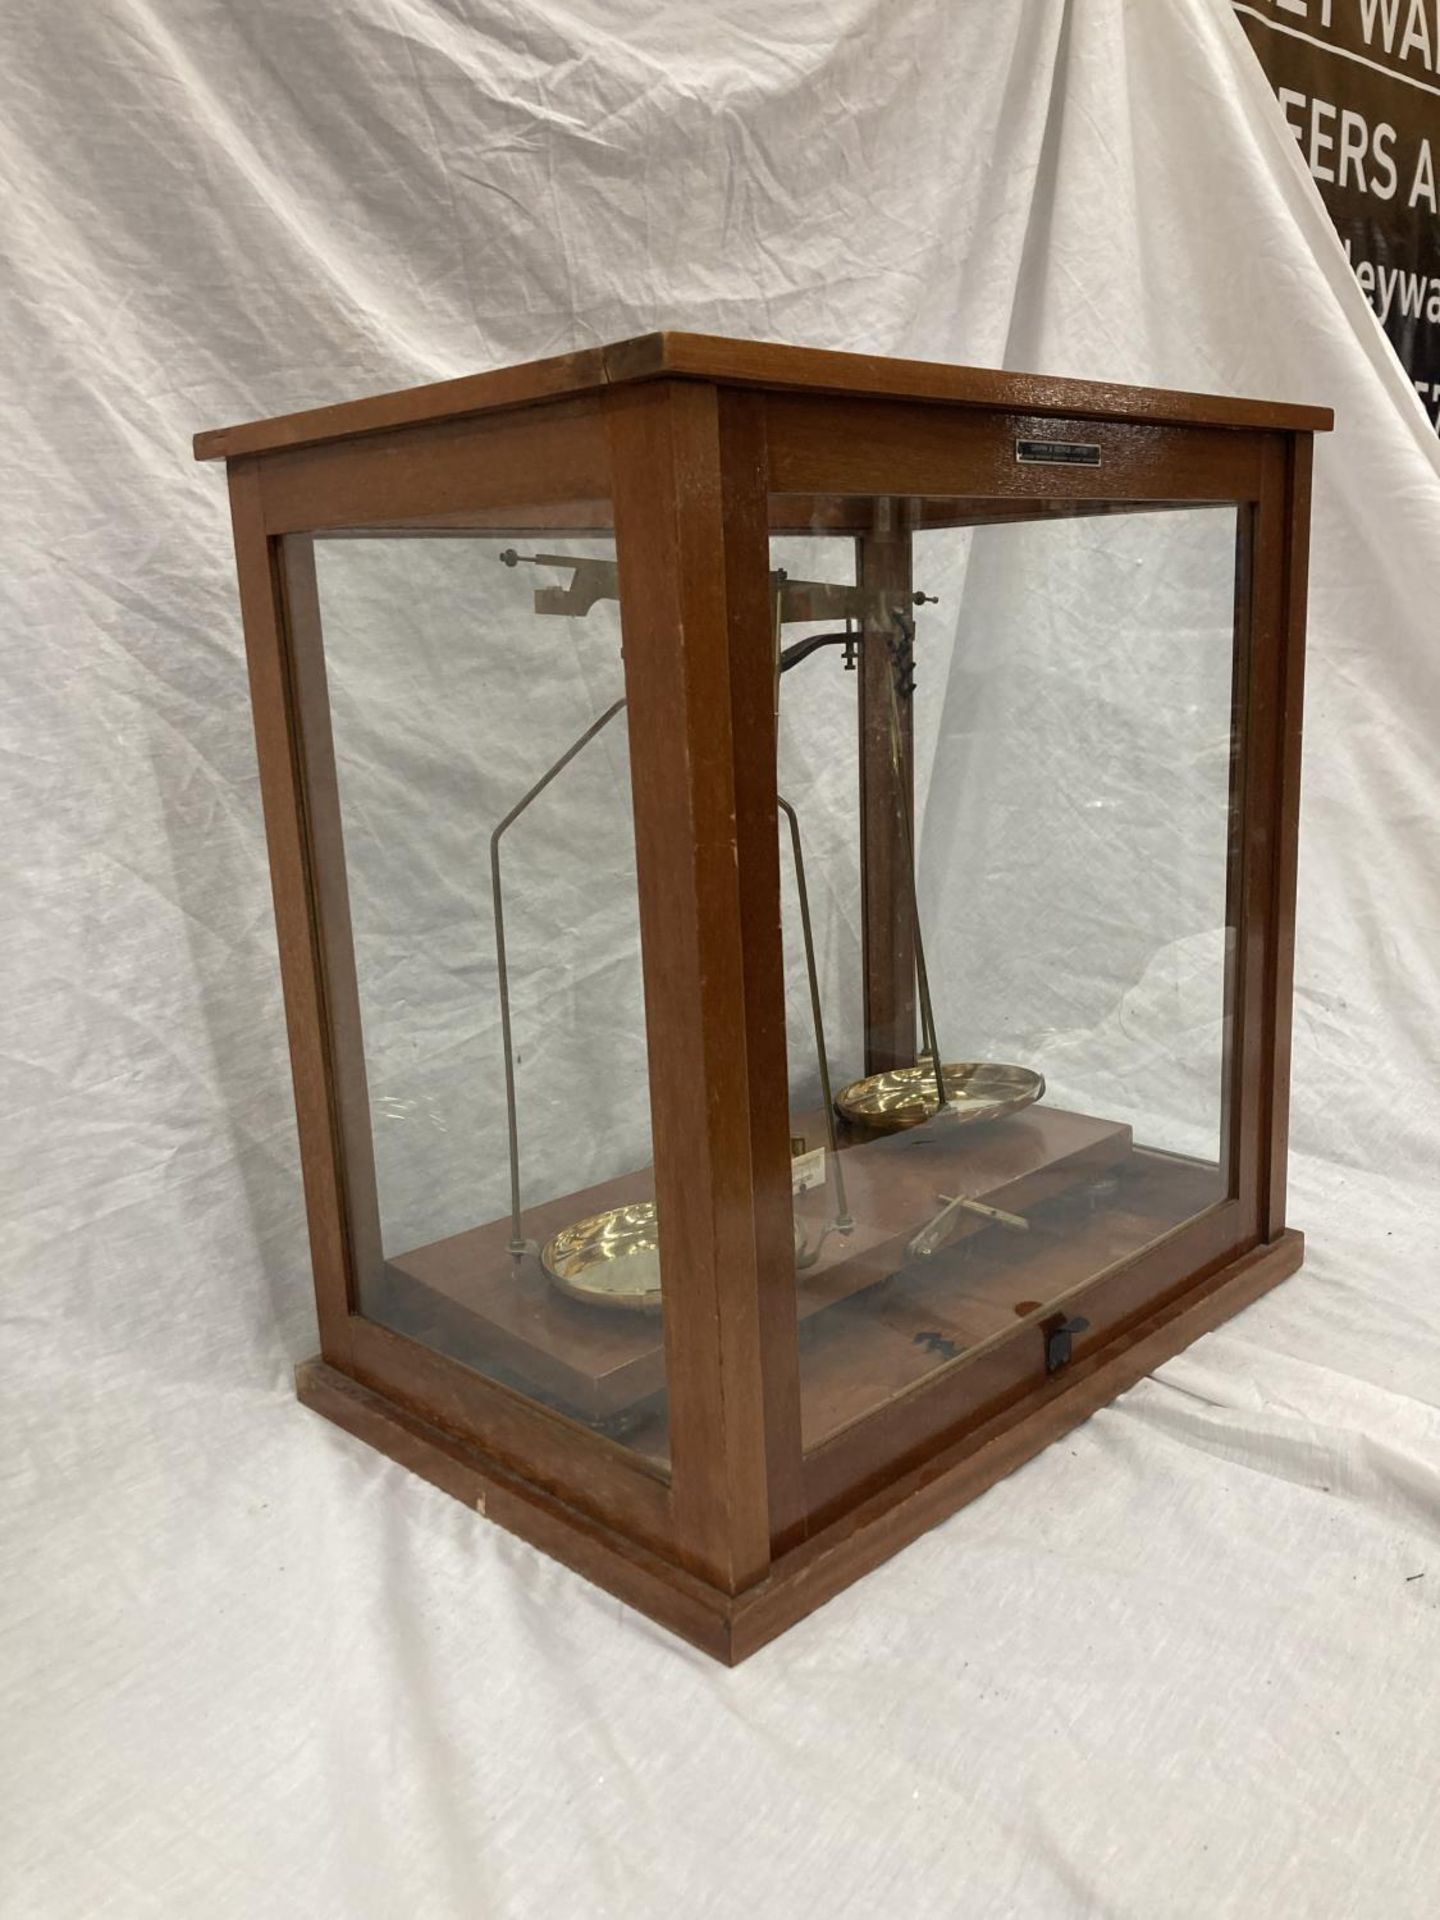 A GRIFFIN AND GEORGE LTD SET OF MICROID SCIENTIFIC SCALES IN A MAHOGANY CASE WITH GLASS PANELS - - Image 6 of 7